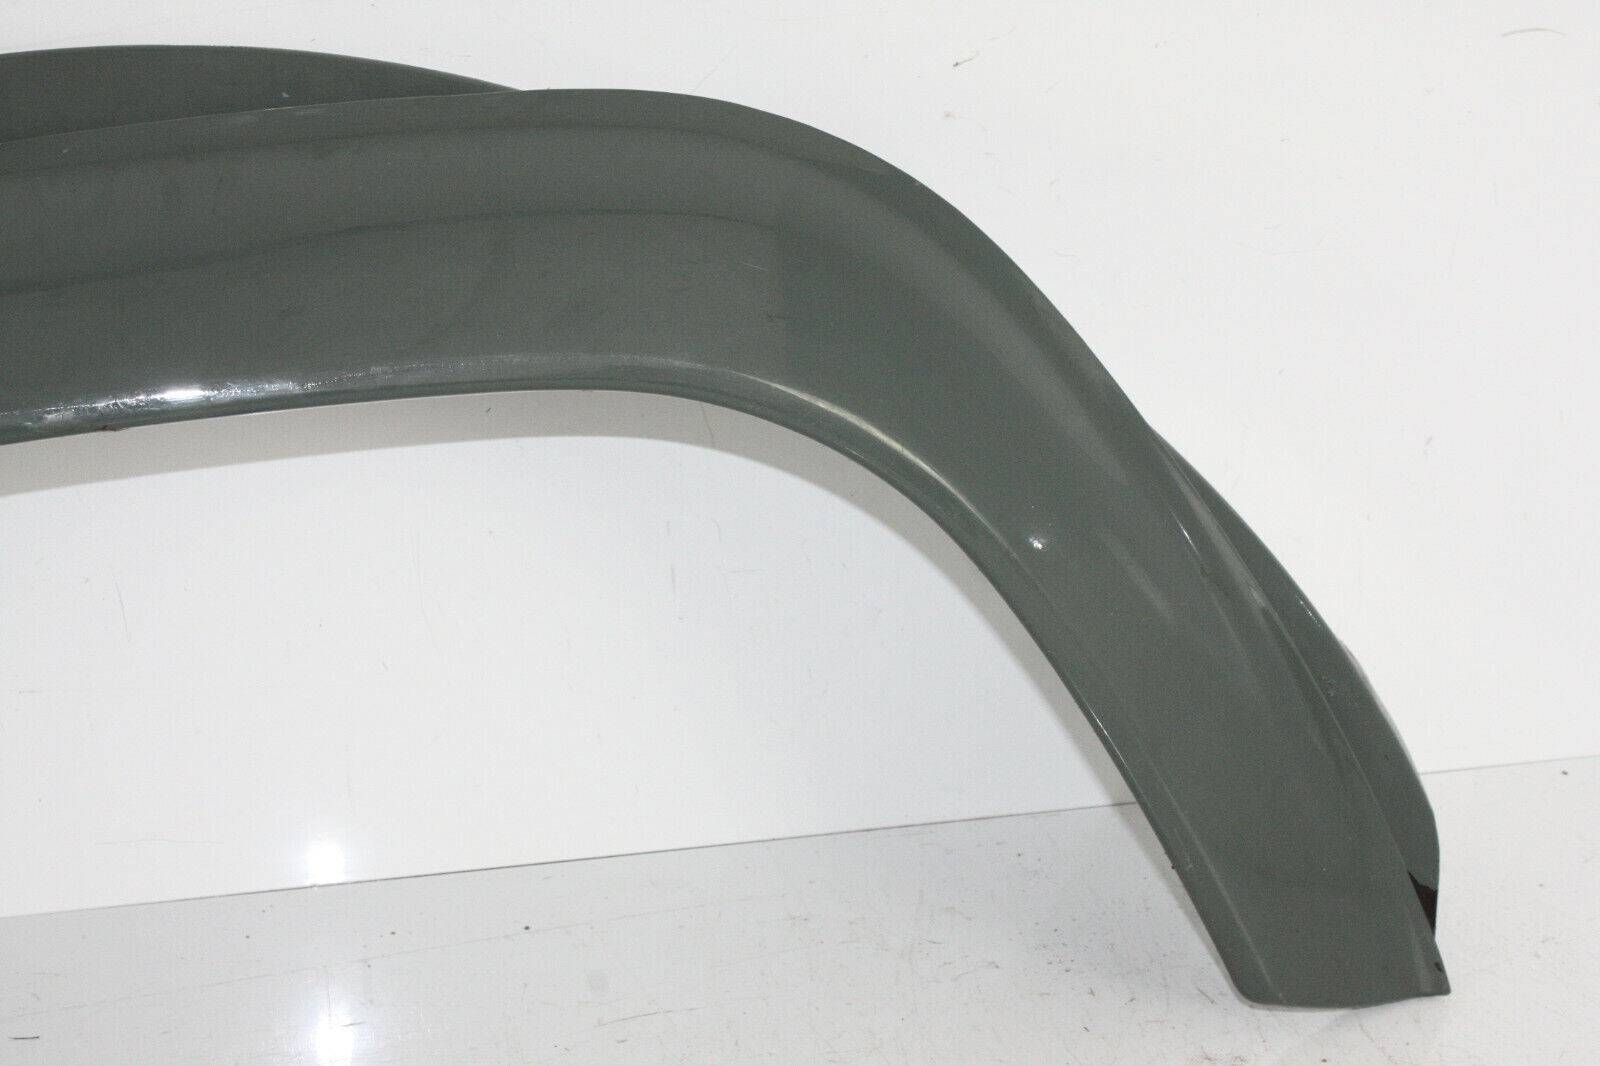 Land-Rover-Defender-Wheel-Arch-Flare-Spat-Front-Left-Painted-Type-Genuine-176479527707-3